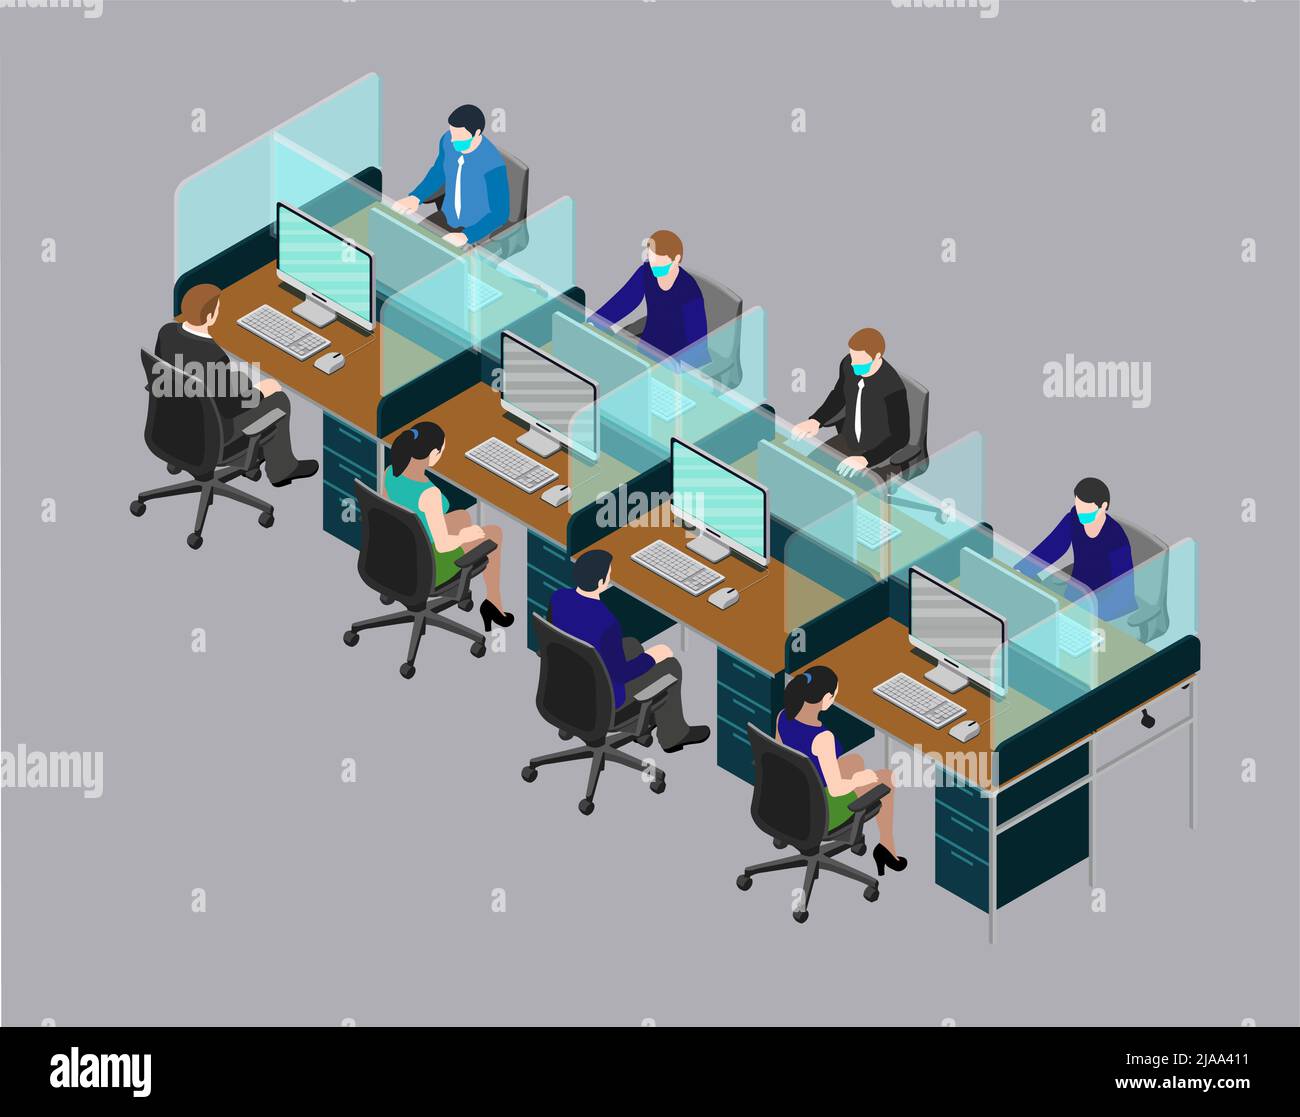 Acrylic partition frame for office workstation area. Social distancing for covid 19 situation. Glass partition design for office workstation. Stock Vector